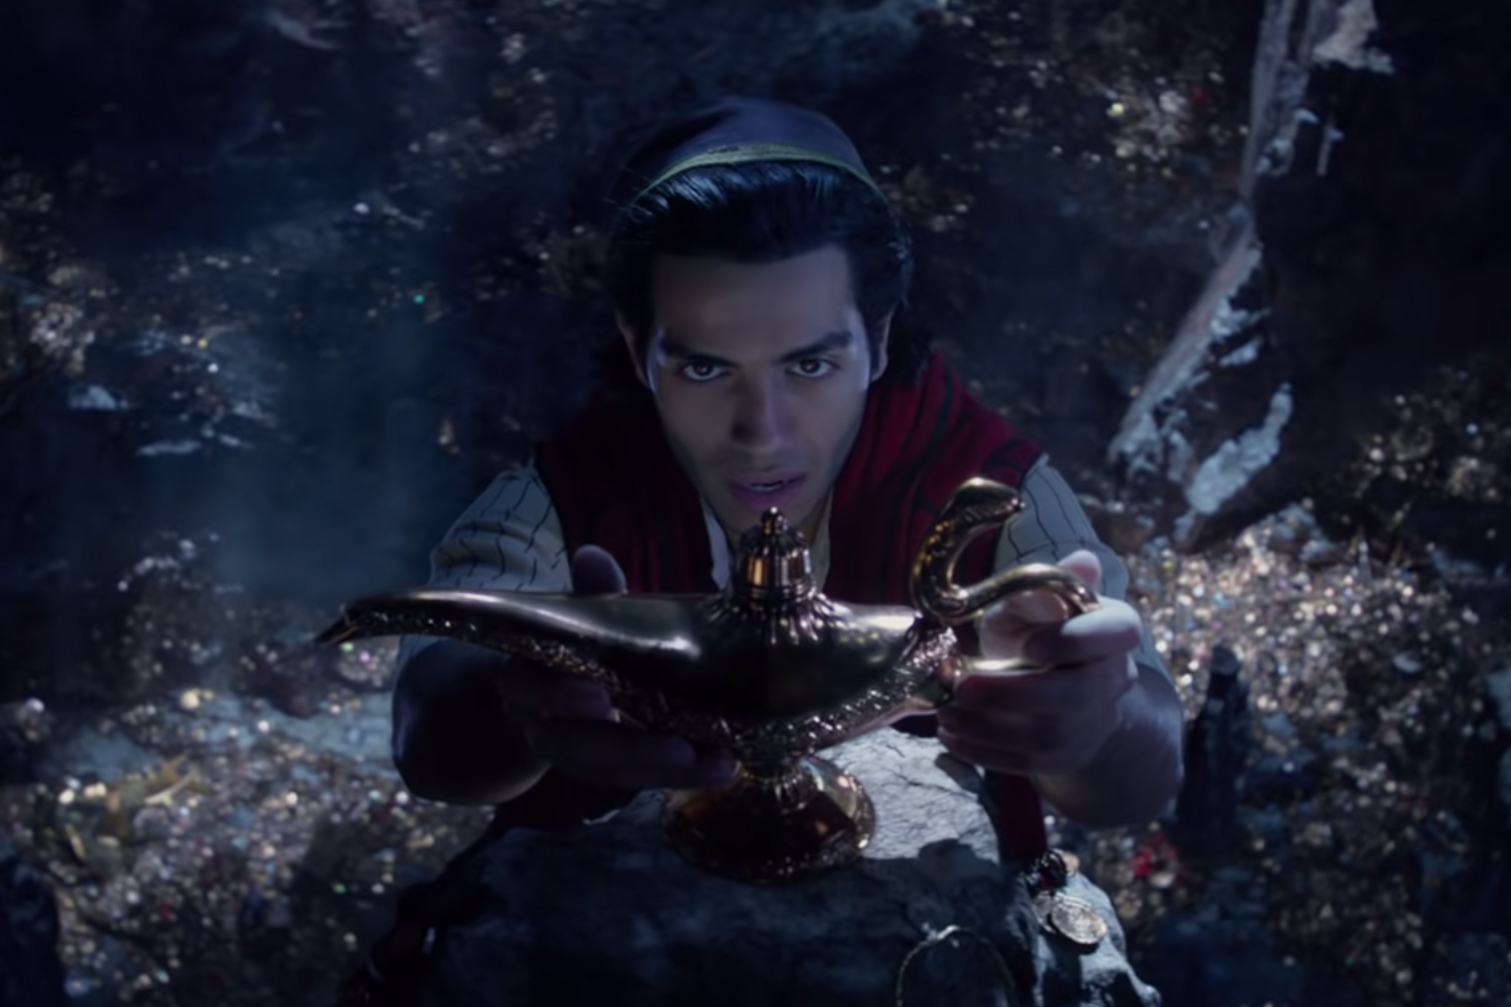 Abu!  See What the Live-Action Aladdin Actors Look Like Next to